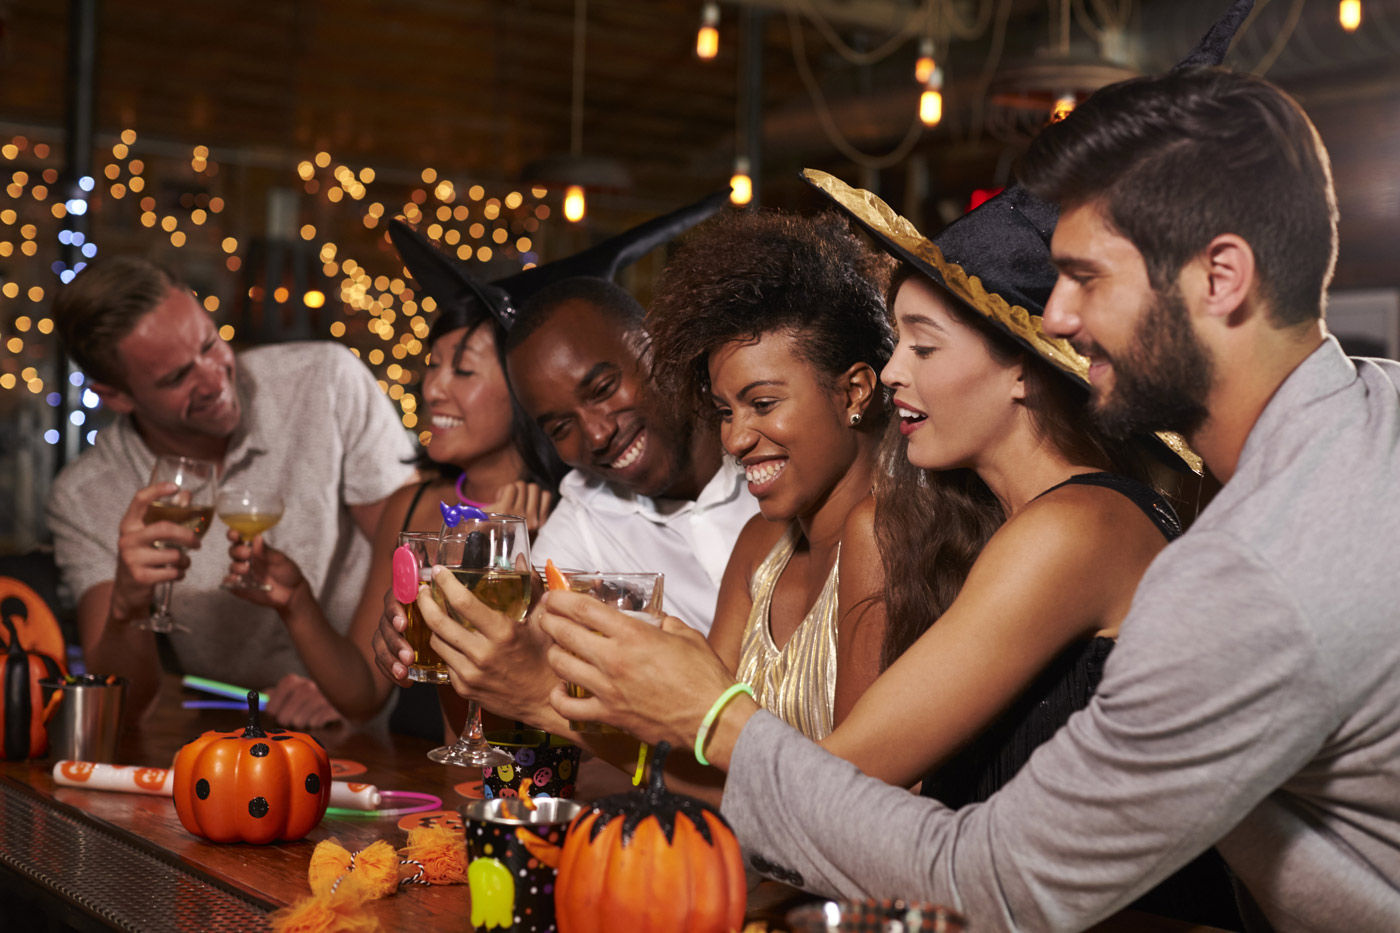 Spend the night at the Comfort Inn and Suites and enjoy some of the Halloween parties happening just steps away from our Medicine Hat hotel. 